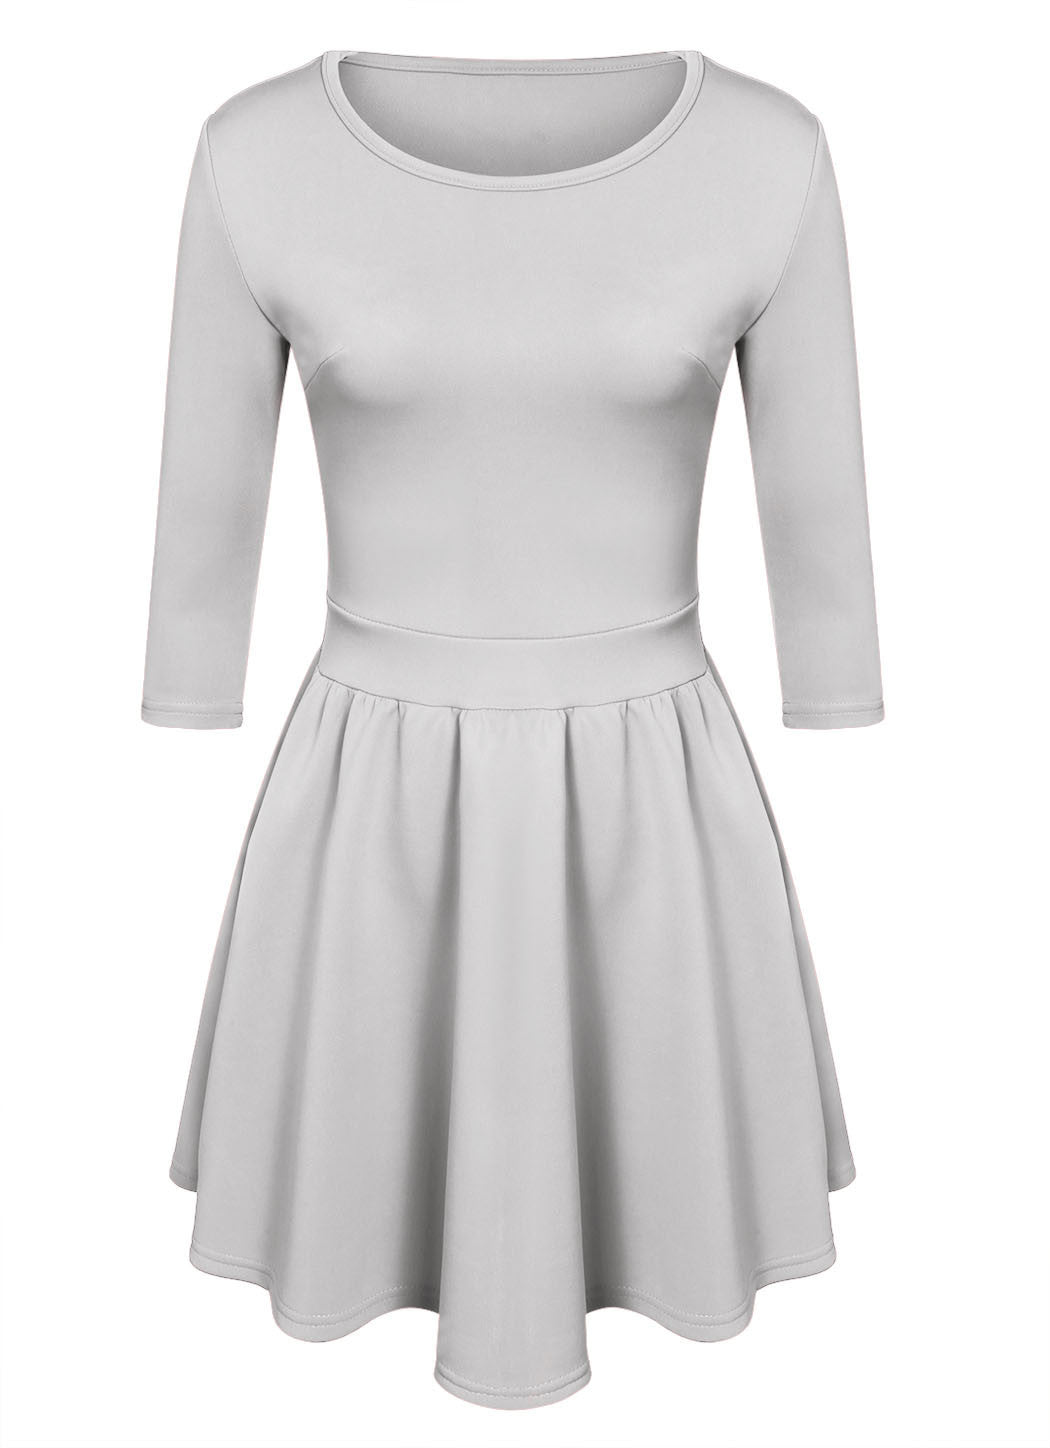 3/4 Sleeves Pleated A-line Short Skater Dress - MeetYoursFashion - 7